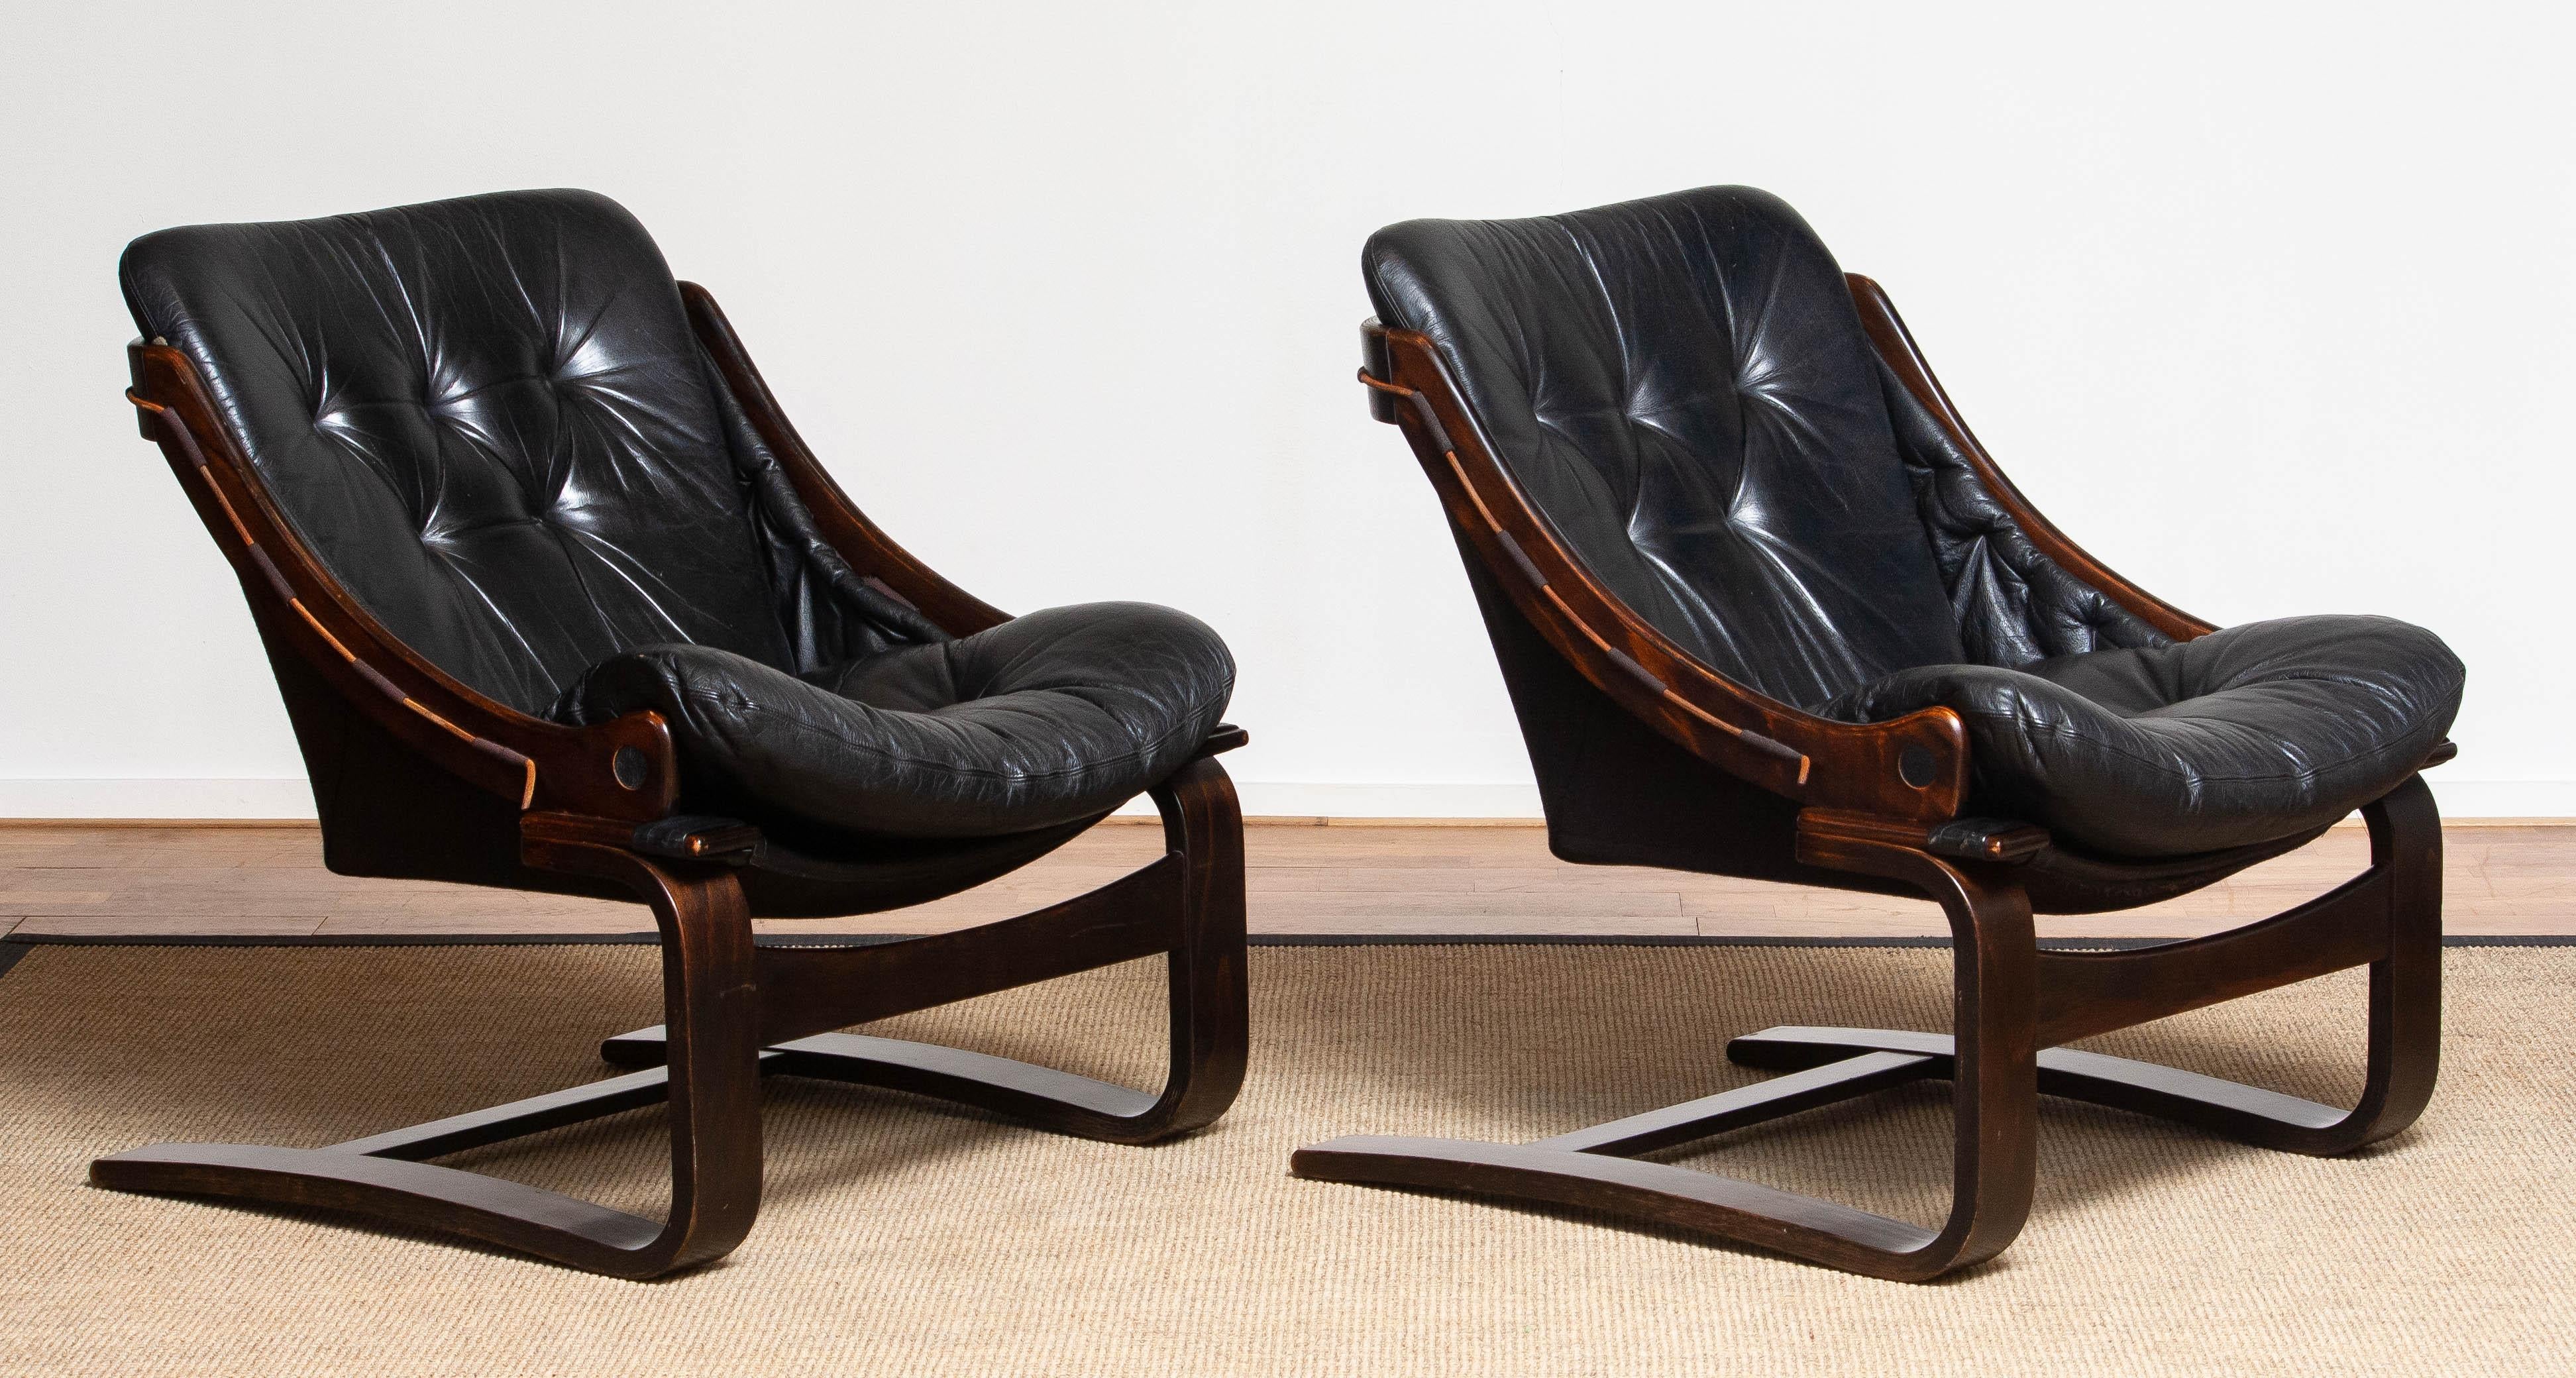 Late 20th Century 1970's Pair Black Leather Club / Lounge Chairs by Ake Fribytter for Nelo Sweden